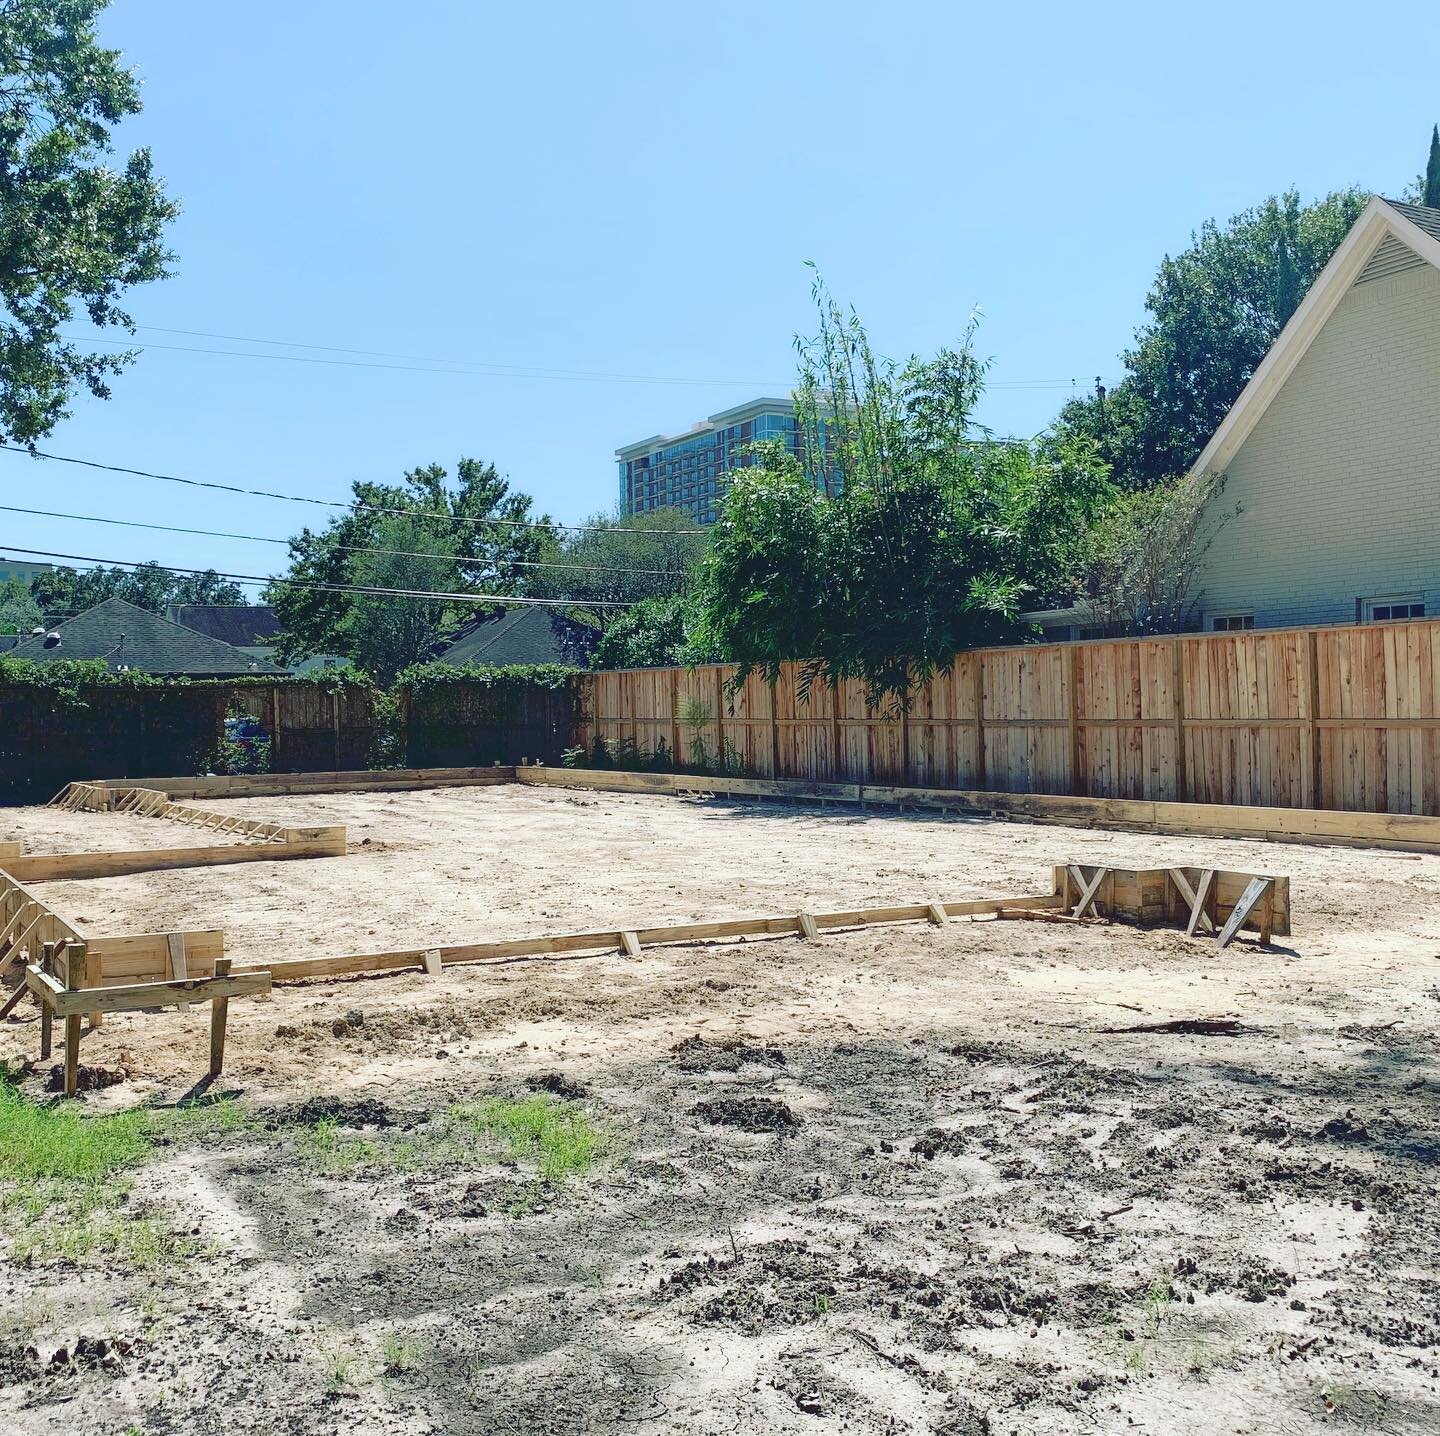 Annnnnnnd, next! Permitted and prepping site in this amazing Houston weather! We are very excited to get our newest custom home out of the ground for our client!